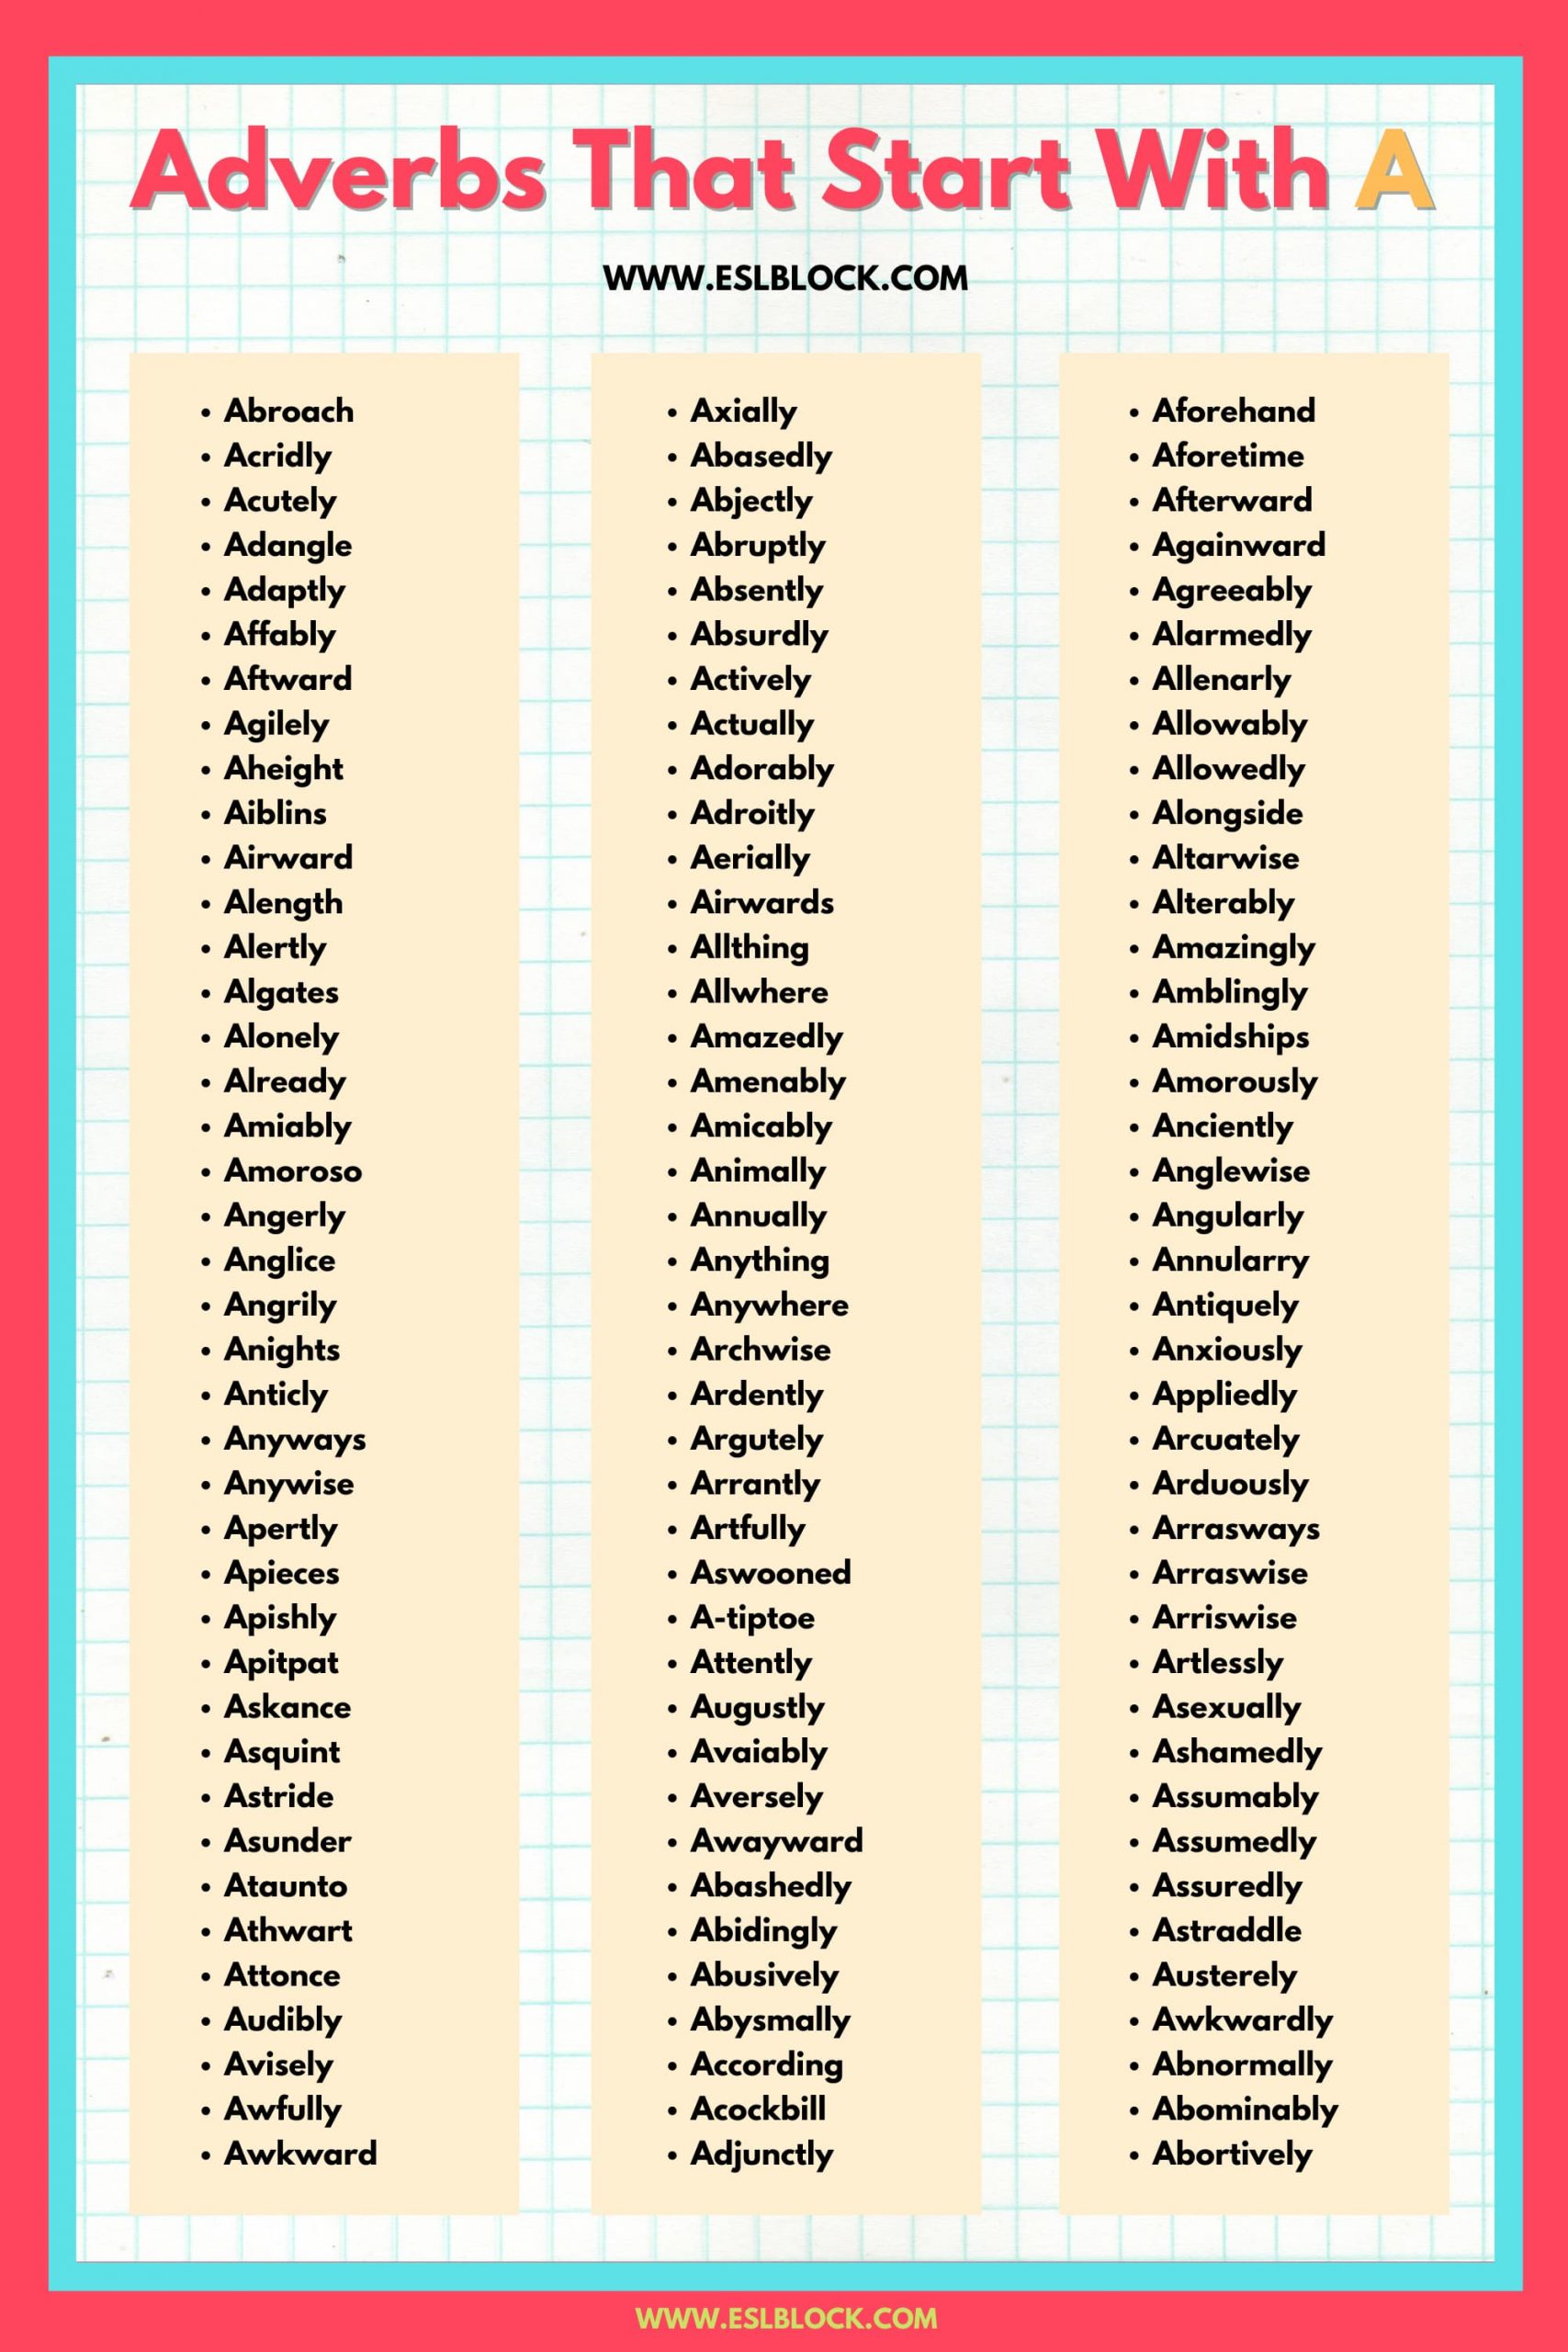 100 Example Sentences Using Adverbs, 4 Letter Adverbs That Start with A, 4 Letter Words, 5 Letter Adverbs That Start with A, 5 Letter Words, 6 Letter Adverbs That Start with A, 6 Letter Words, A to Z Adverbs, AA Adverbs, Adverb vocabulary words, Adverbs, Adverbs That Start with A, Adverbs with Example Sentences, All Adverbs, Types of Adverbs, Types of Adverbs with Example Sentences, Vocabulary, What are Adverbs, What are the types of Adverbs, Words That with A